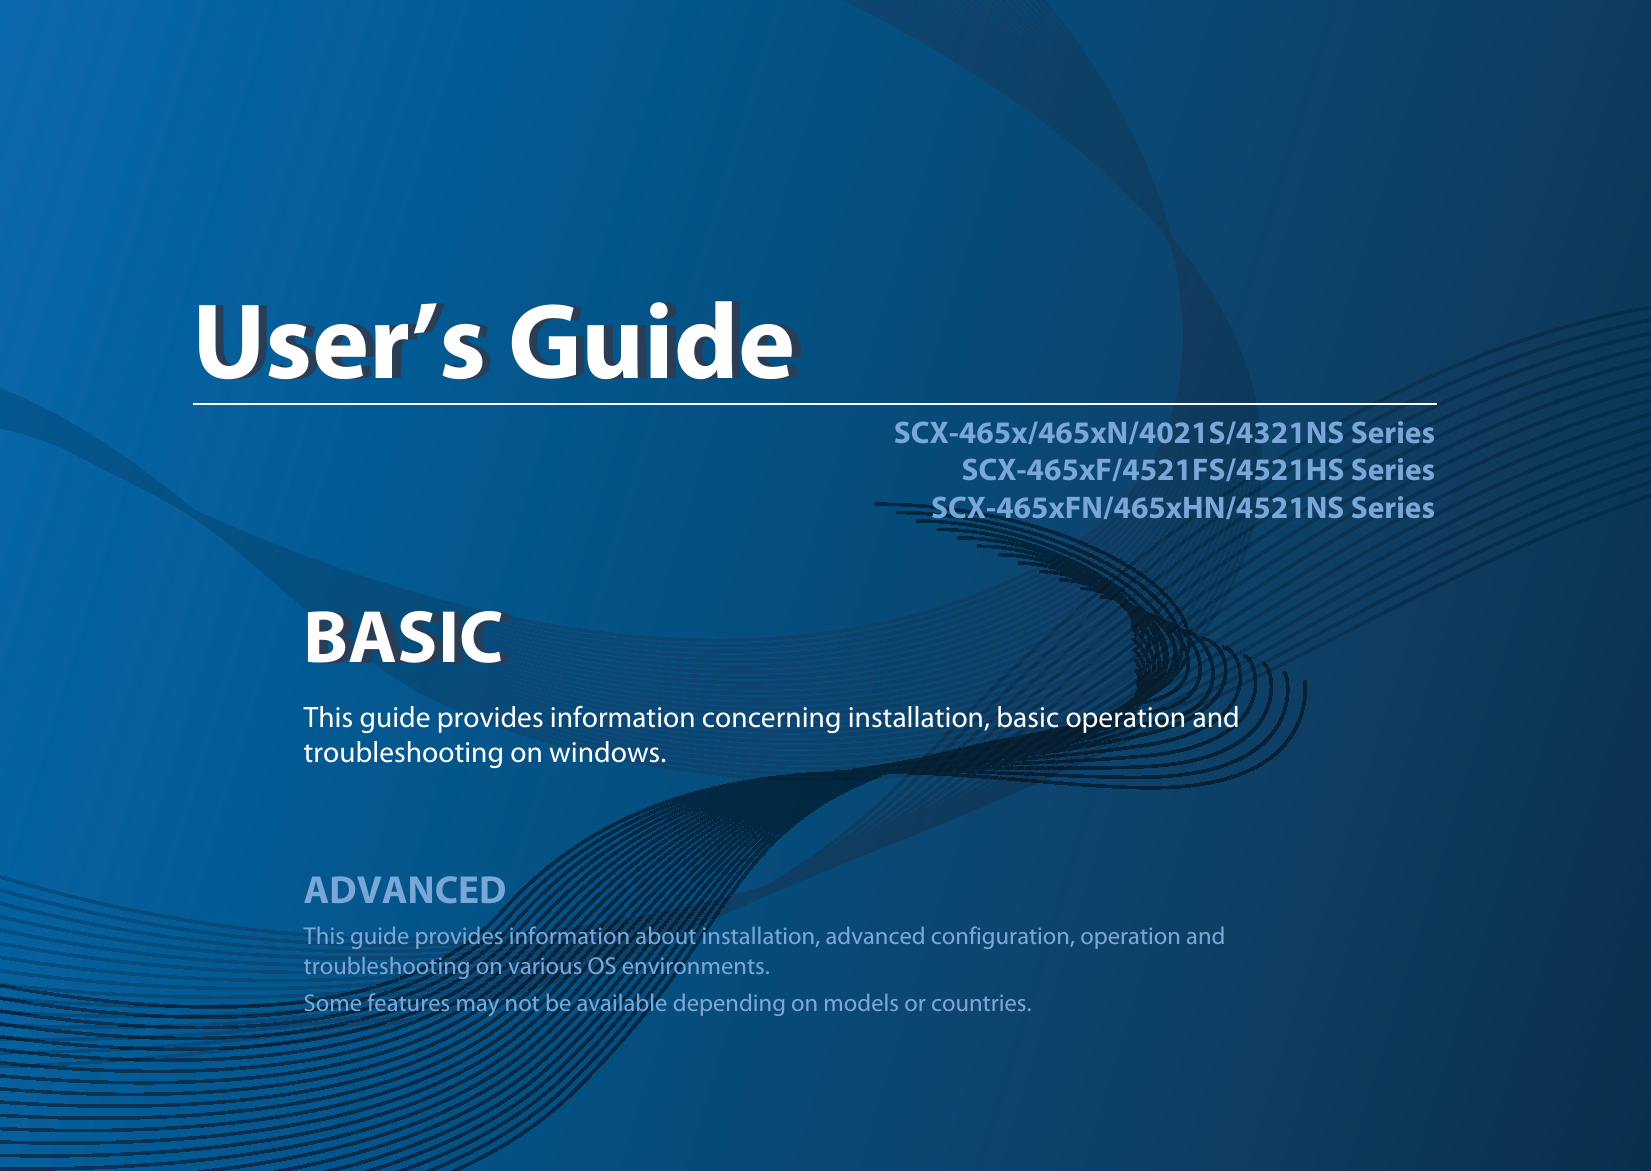 BASICUser’s GuideSCX-465x/465xN/4021S/4321NS SeriesSCX-465xF/4521FS/4521HS SeriesSCX-465xFN/465xHN/4521NS SeriesBASICUser’s GuideThis guide provides information concerning installation, basic operation and troubleshooting on windows.ADVANCEDThis guide provides information about installation, advanced configuration, operation and troubleshooting on various OS environments. Some features may not be available depending on models or countries.